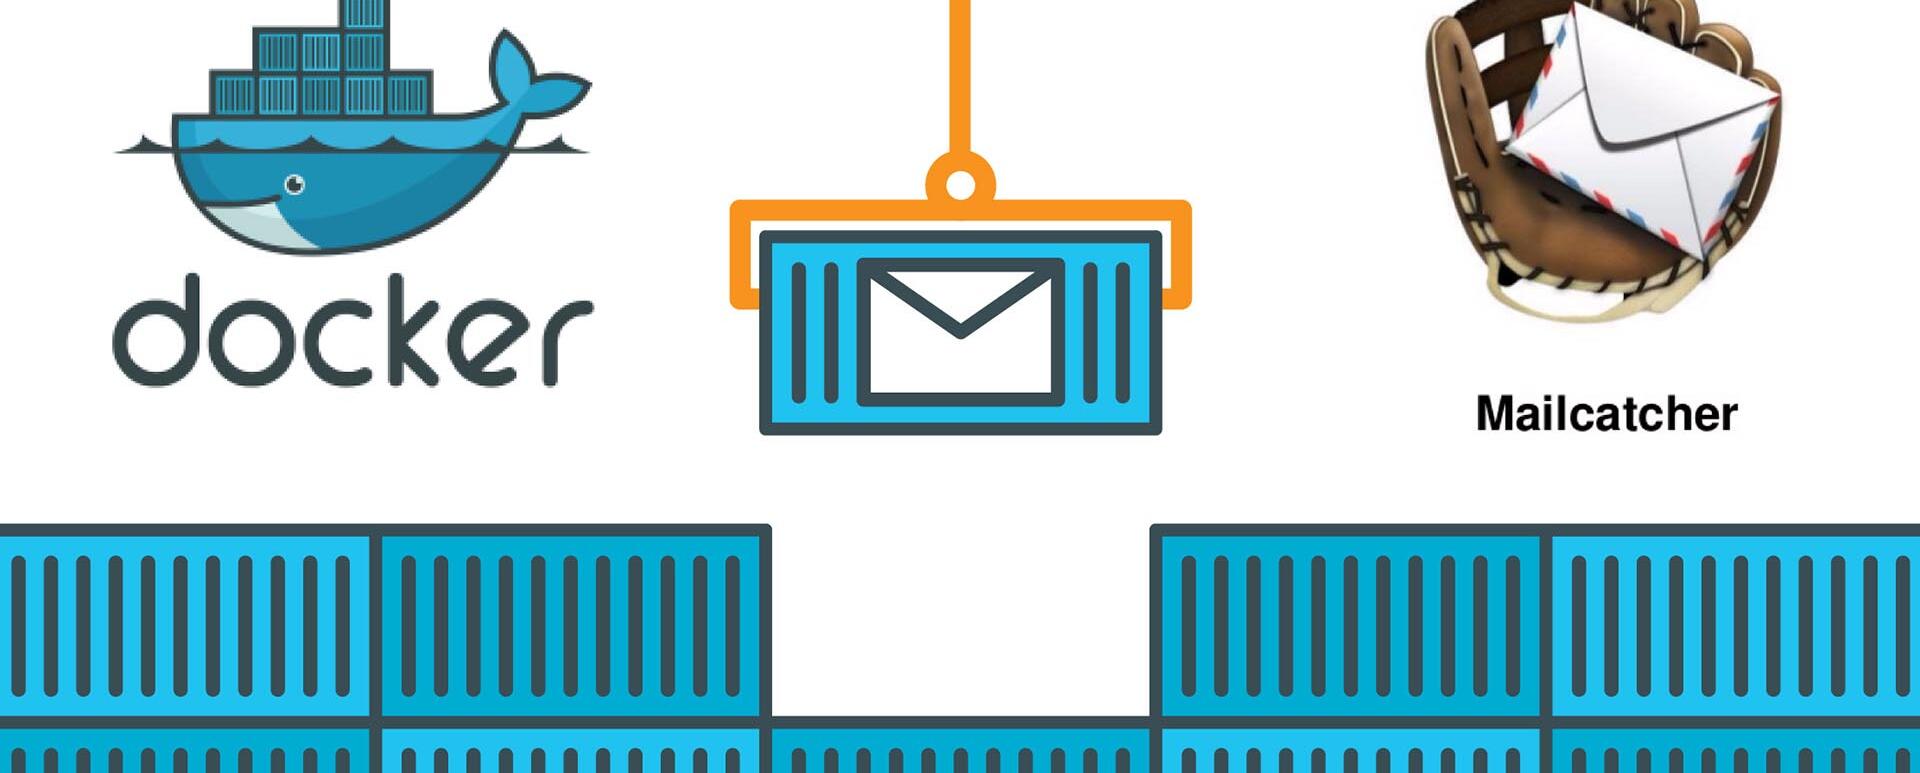 Docker and mailcatcher logo are visible on the opposite sides of an image at the top. They are separated by a grab lifting a unit marked with an envelope from a stack of identical blue containers